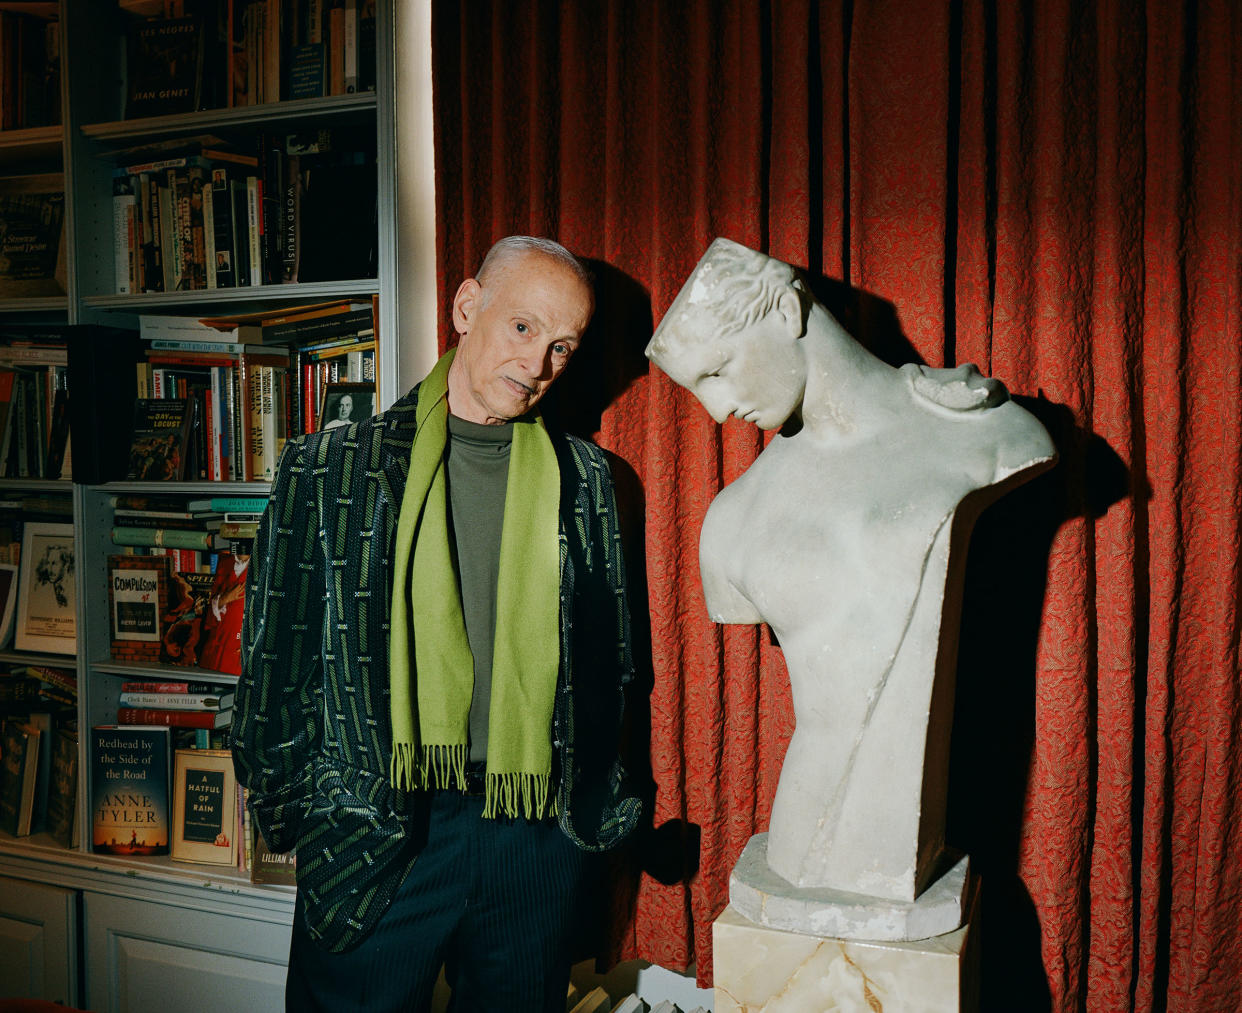 BALTIMORE, MD - FEBRUARY 14, 2022: Portrait of director and writer, John Waters, in his Baltimore home. CREDIT: Peter Fisher for TIME